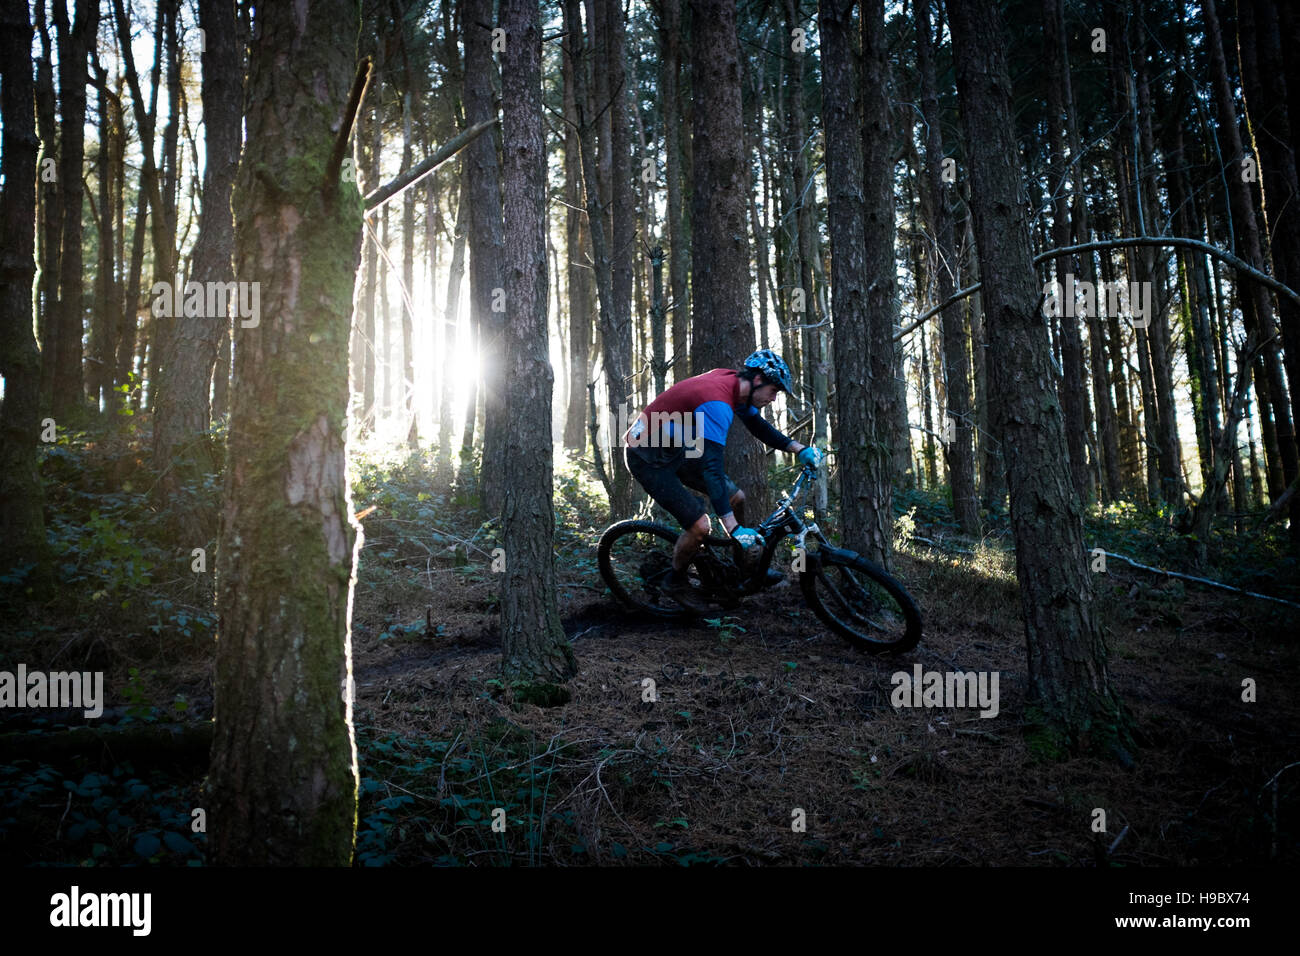 A cyclist rides a forest trail on his mountain bike in Wales, United Kingdom. Wales has become popular with cyclists. Stock Photo